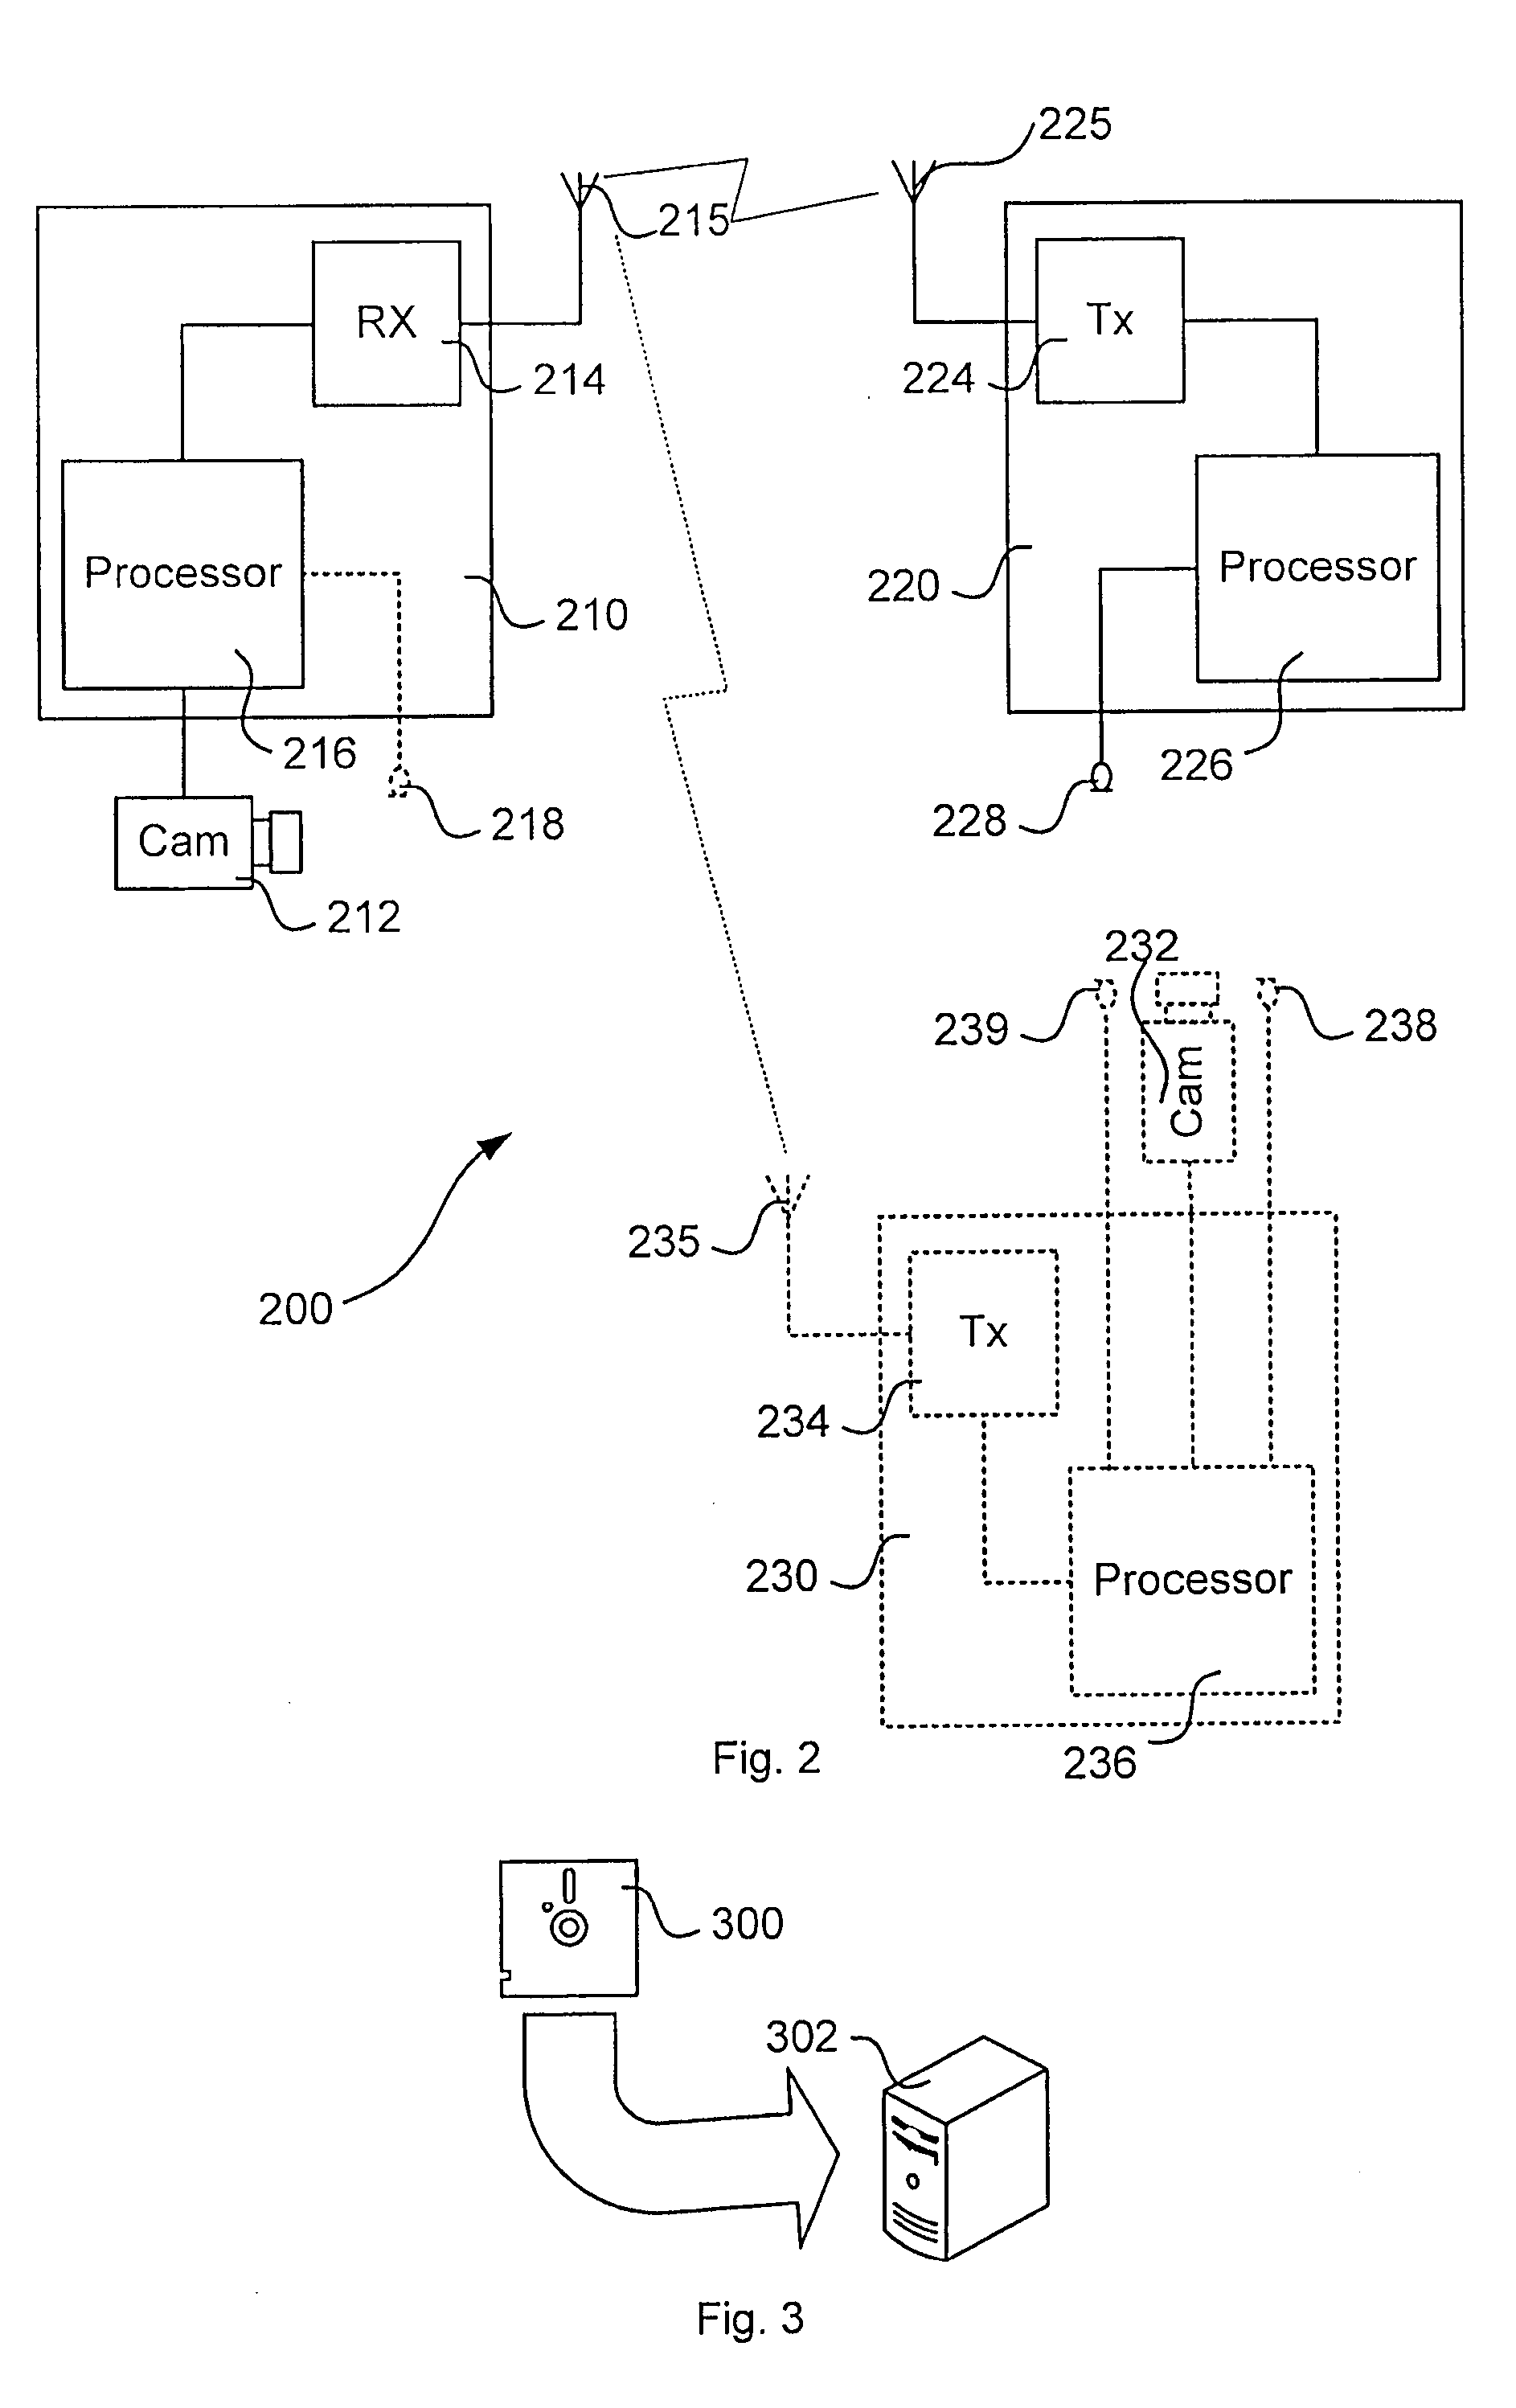 Methods, apparatus, system and computer program product for audio input at video recording